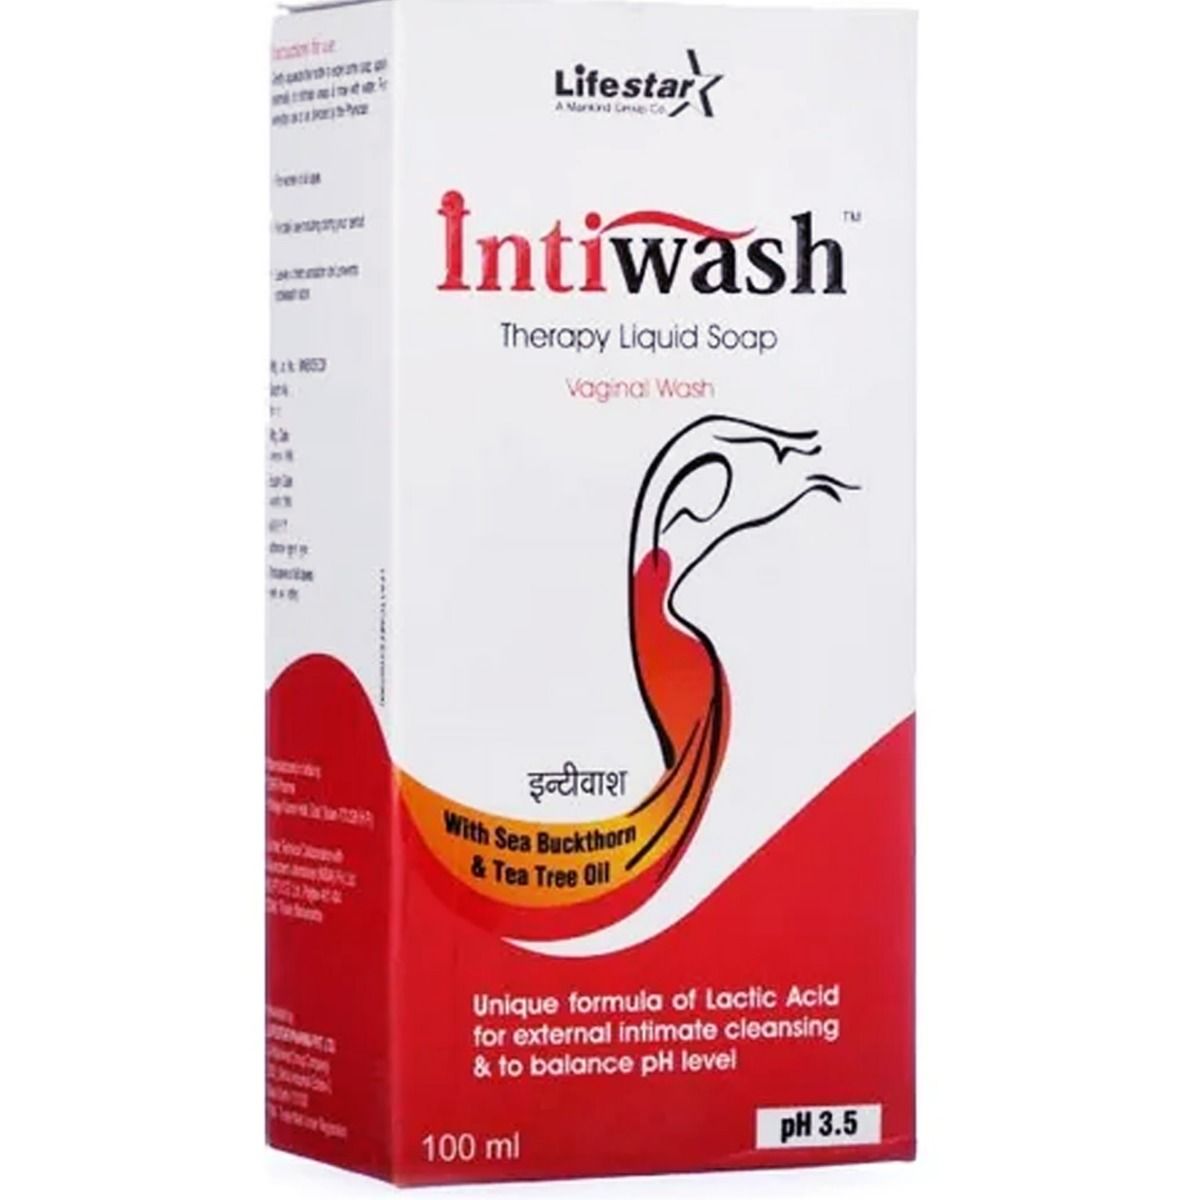 Intiwash Therapy Liquid Soap, 100 ml, Pack of 1 